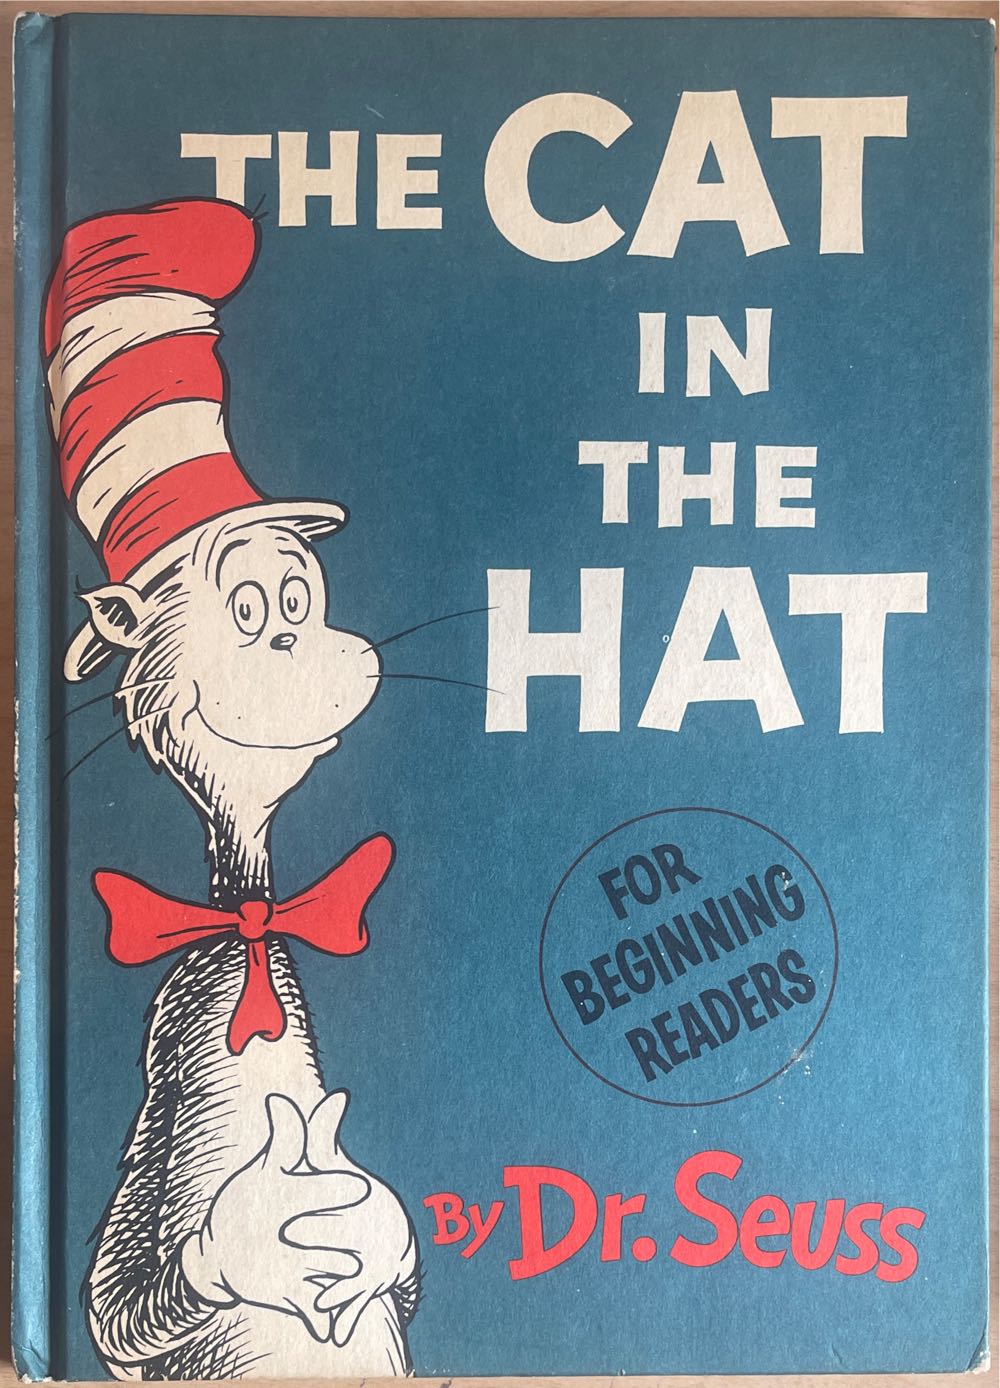 The Cat in the Hat - Dr. Seuss (Beginner Books - Hardcover) book collectible [Barcode 9780394800011] - Main Image 3